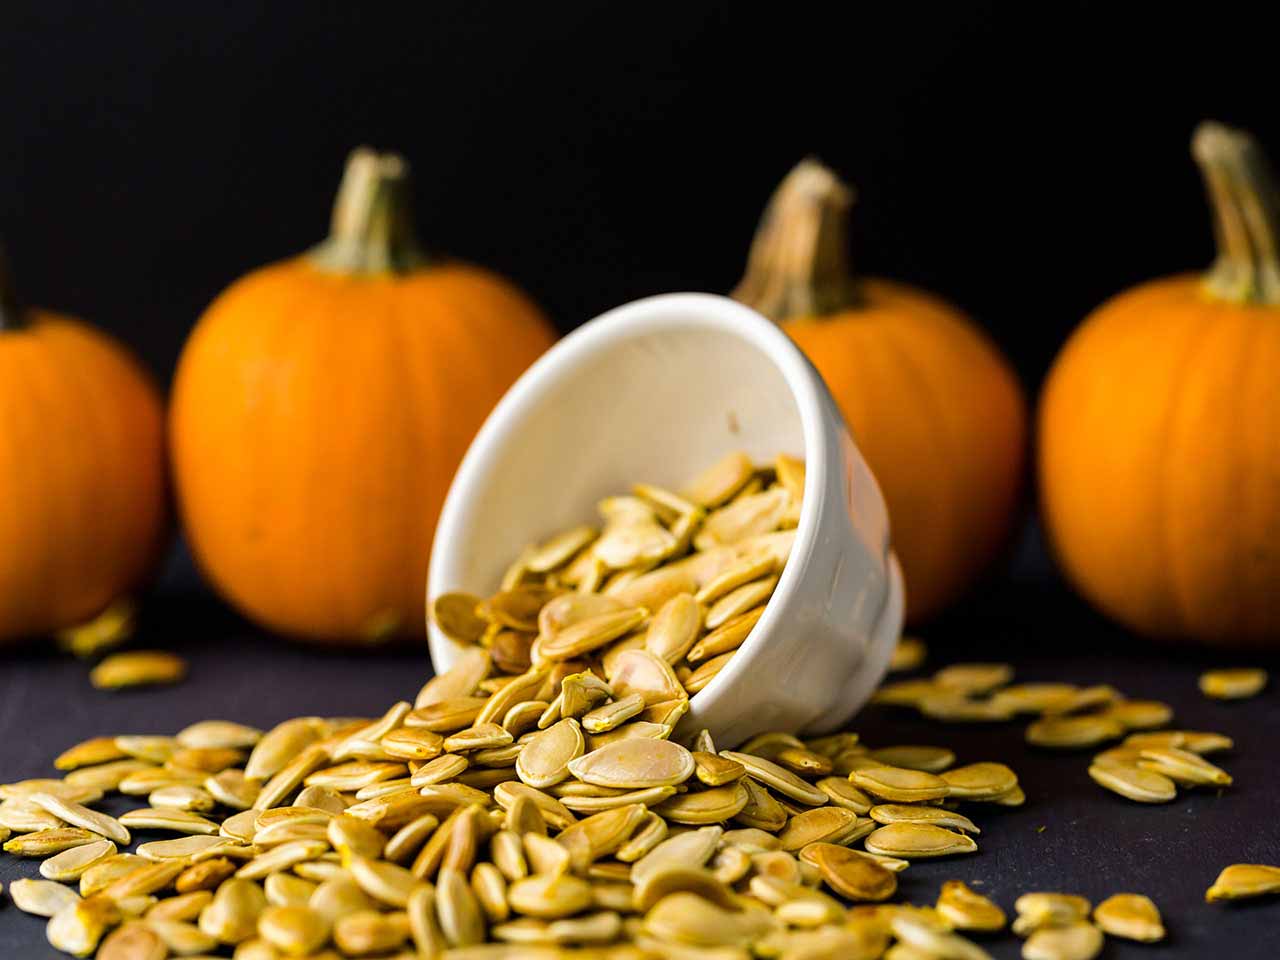 ust a teaspoon of pumpkin, make your body with dried seeds